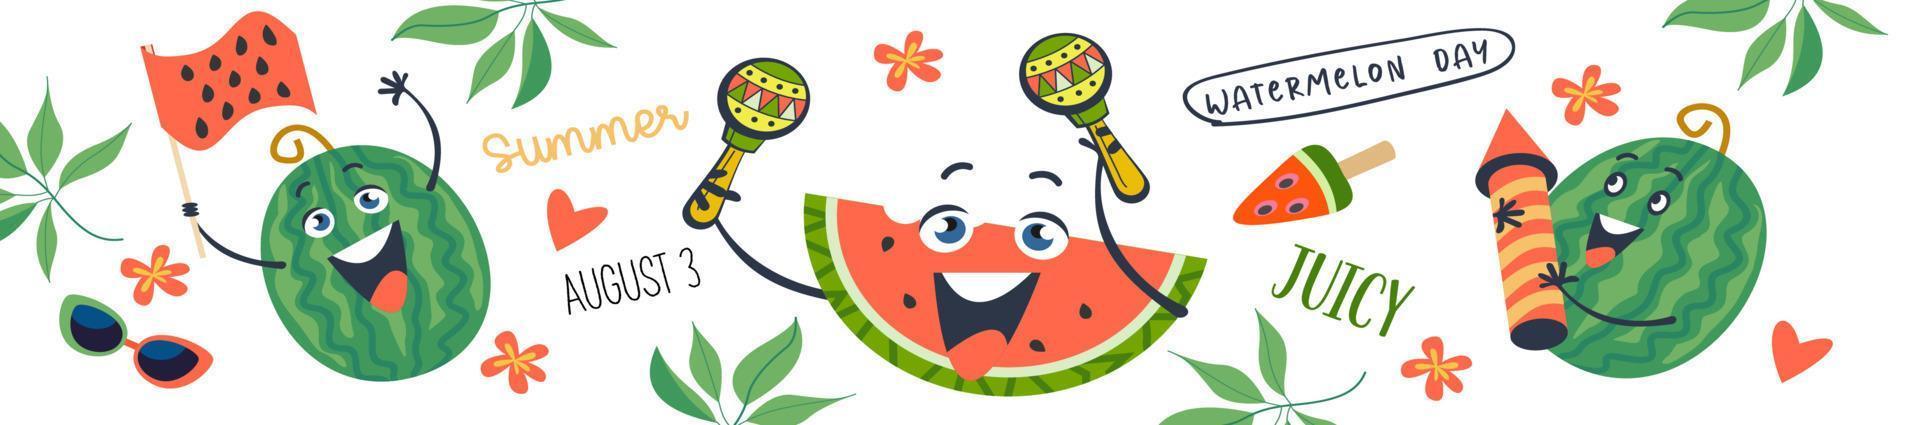 Watermelon Day. Festive fun vector banner. A set of cliparts on a white background.